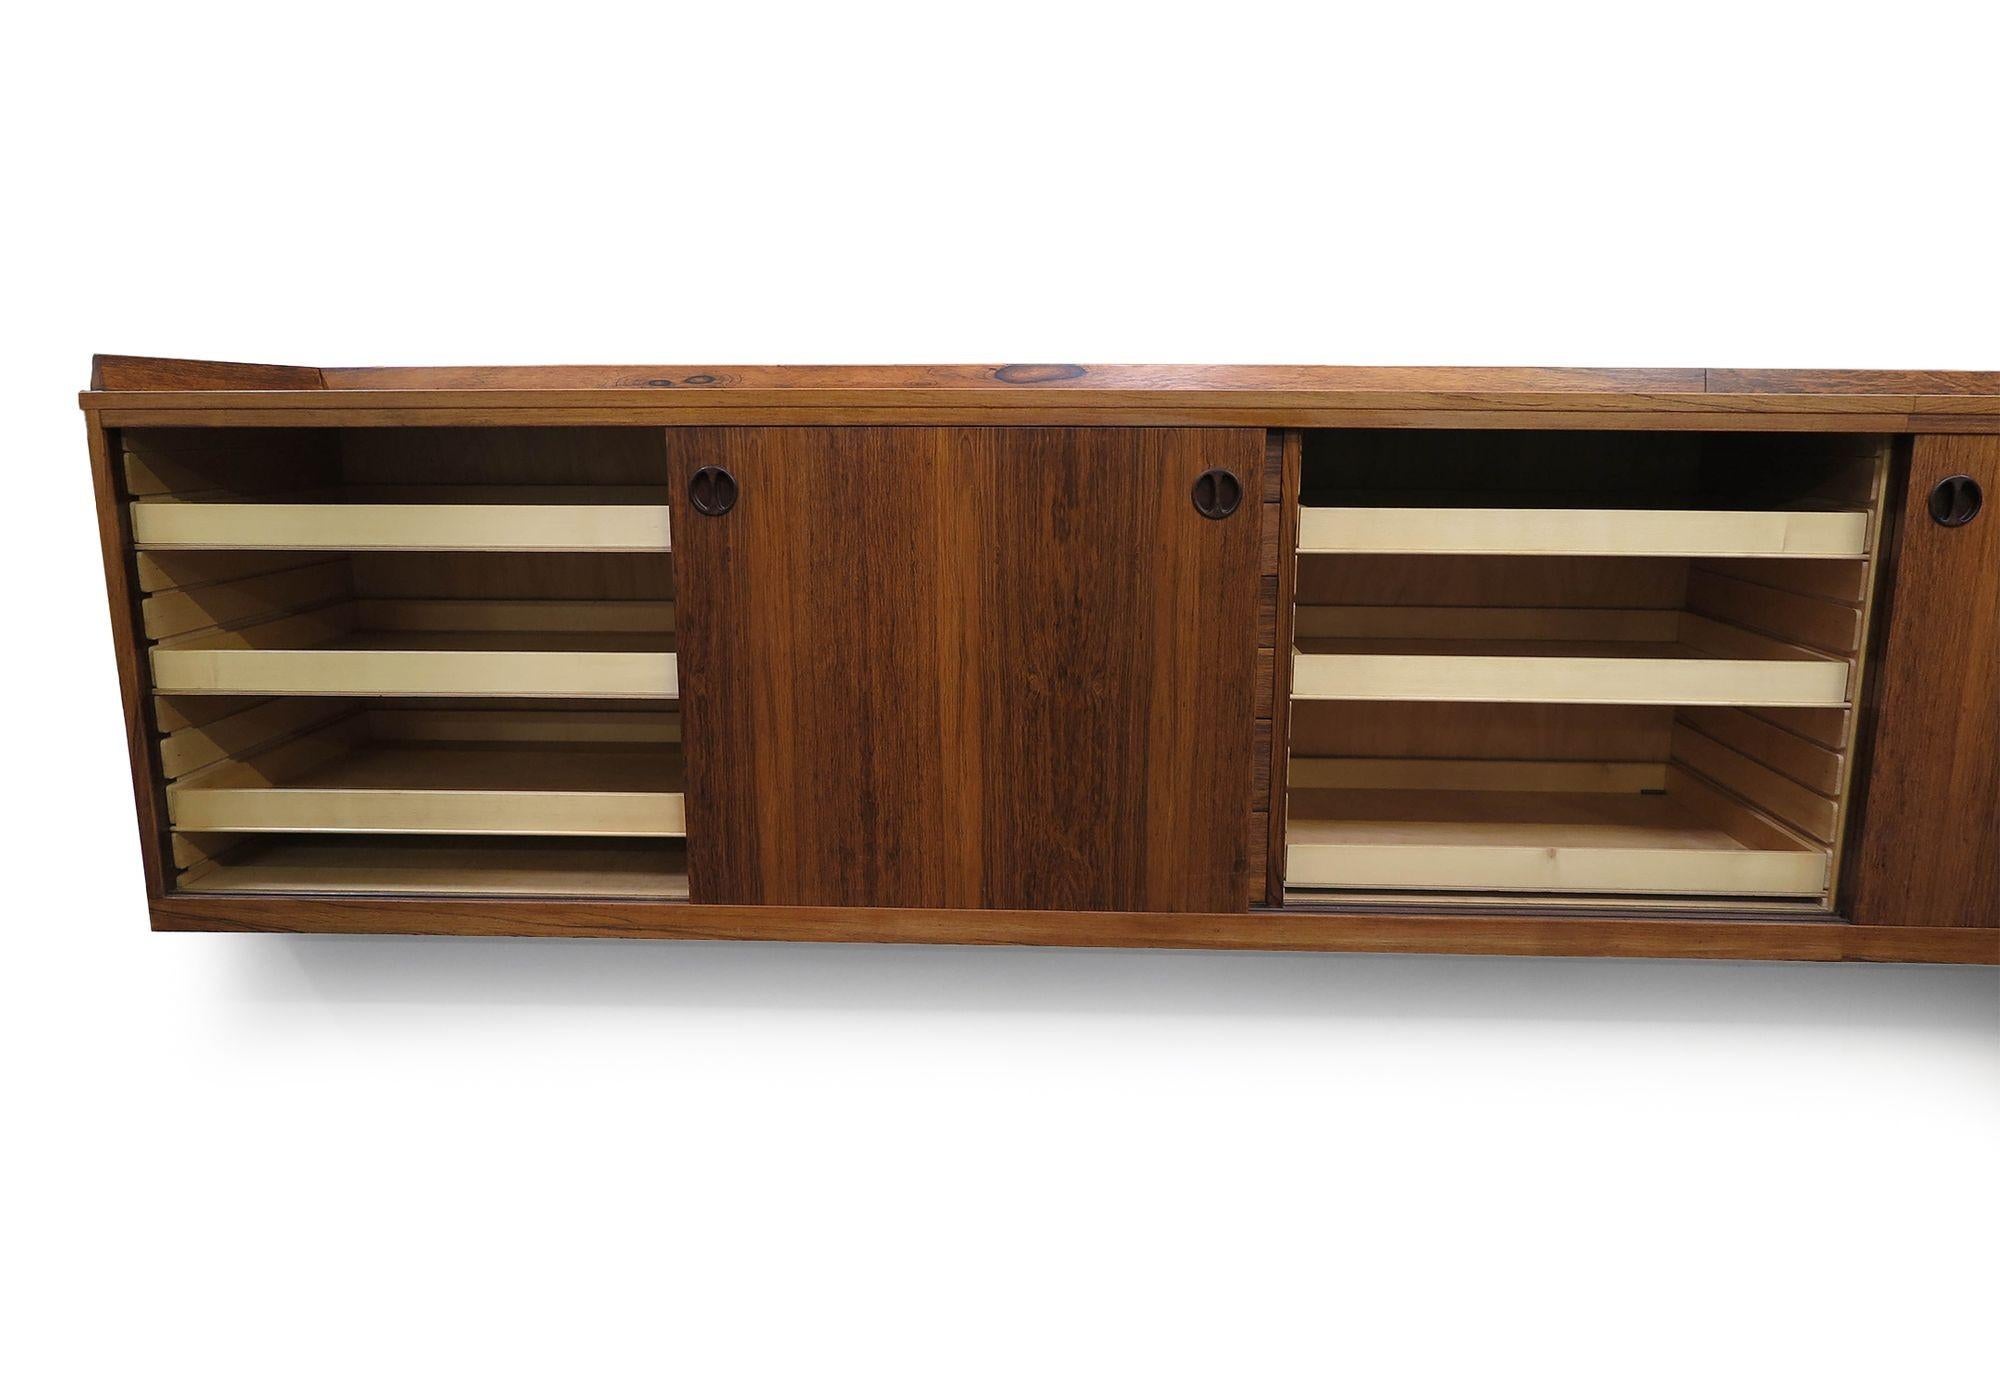 13' Danish Rosewood Wall Mount Sideboard In Good Condition For Sale In Oakland, CA